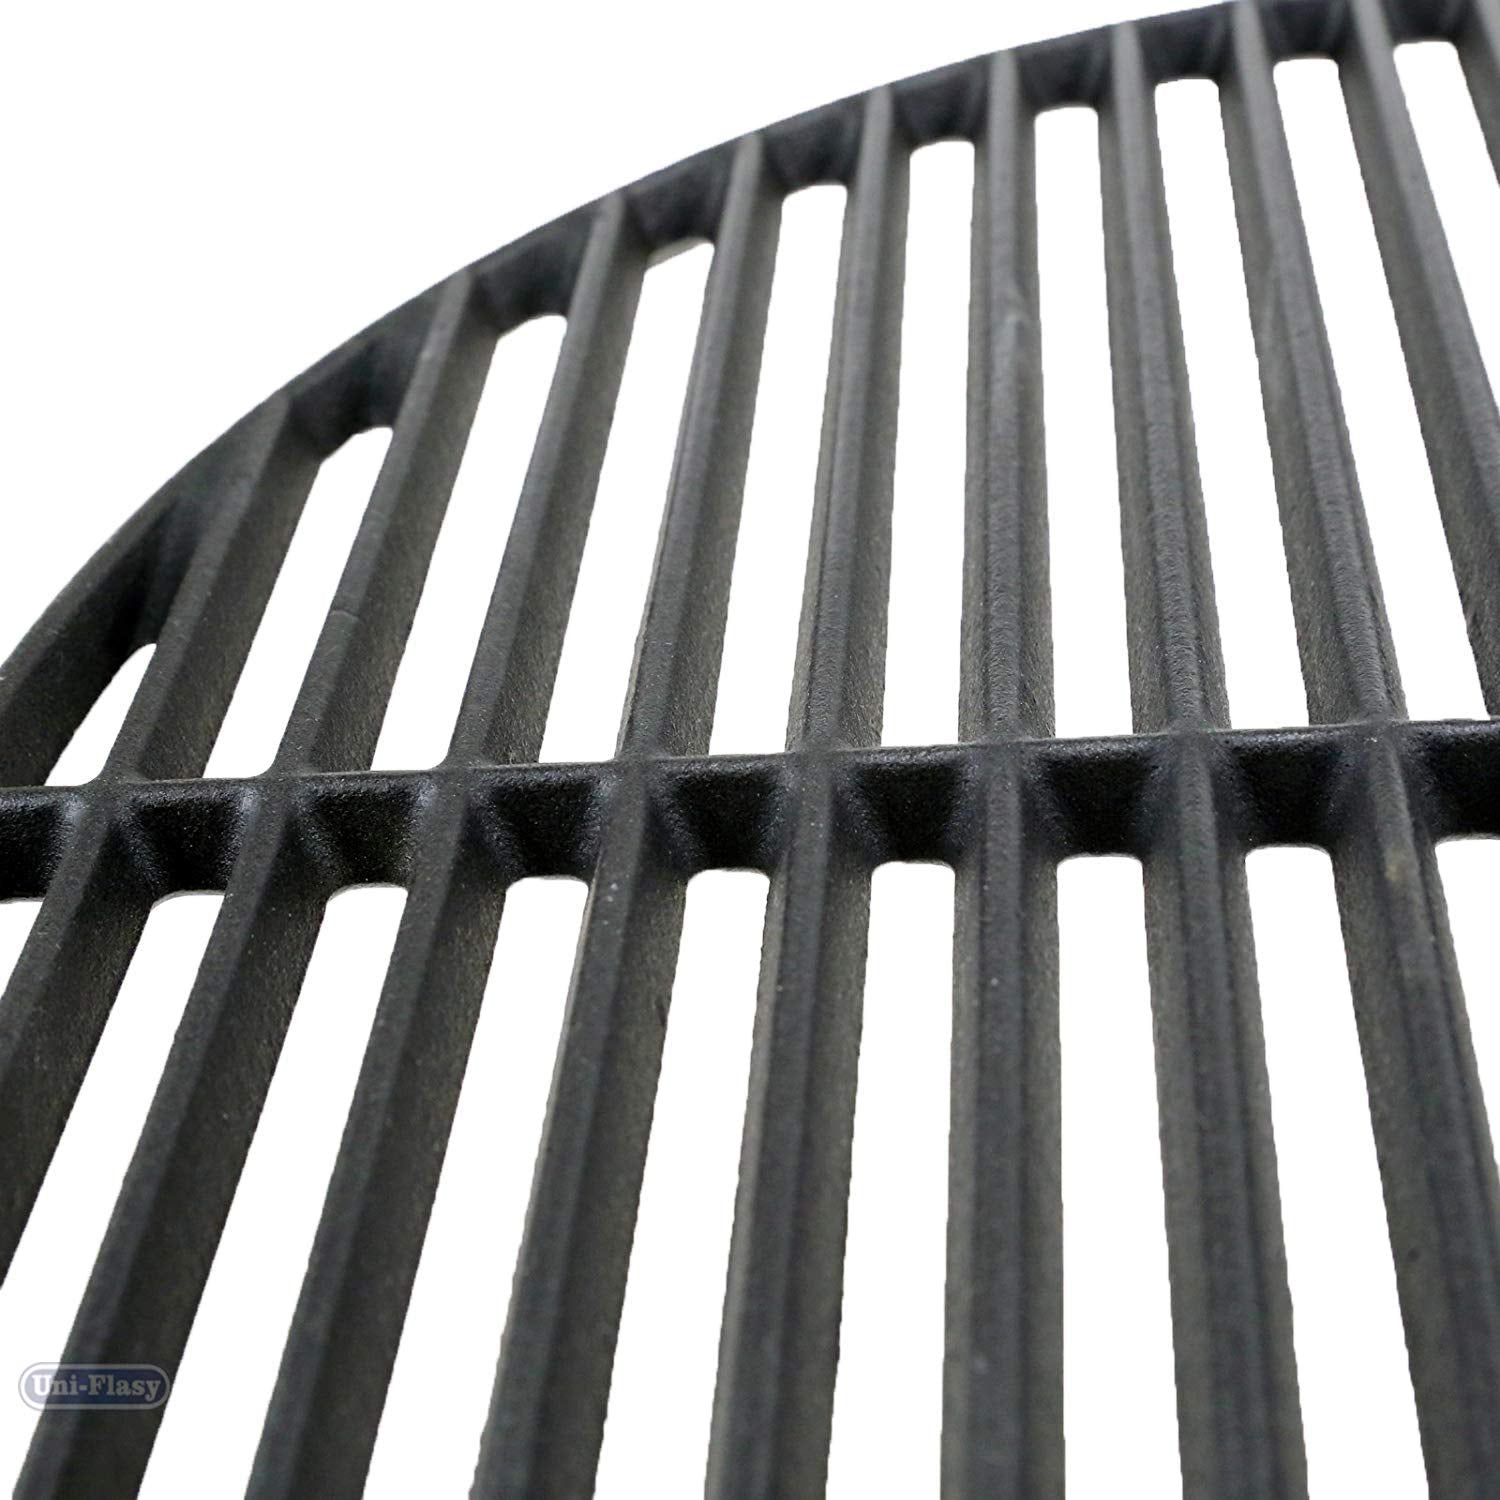 BBQ Cooking Grate 18 3/16 for Large Big Green Egg Vision Grill